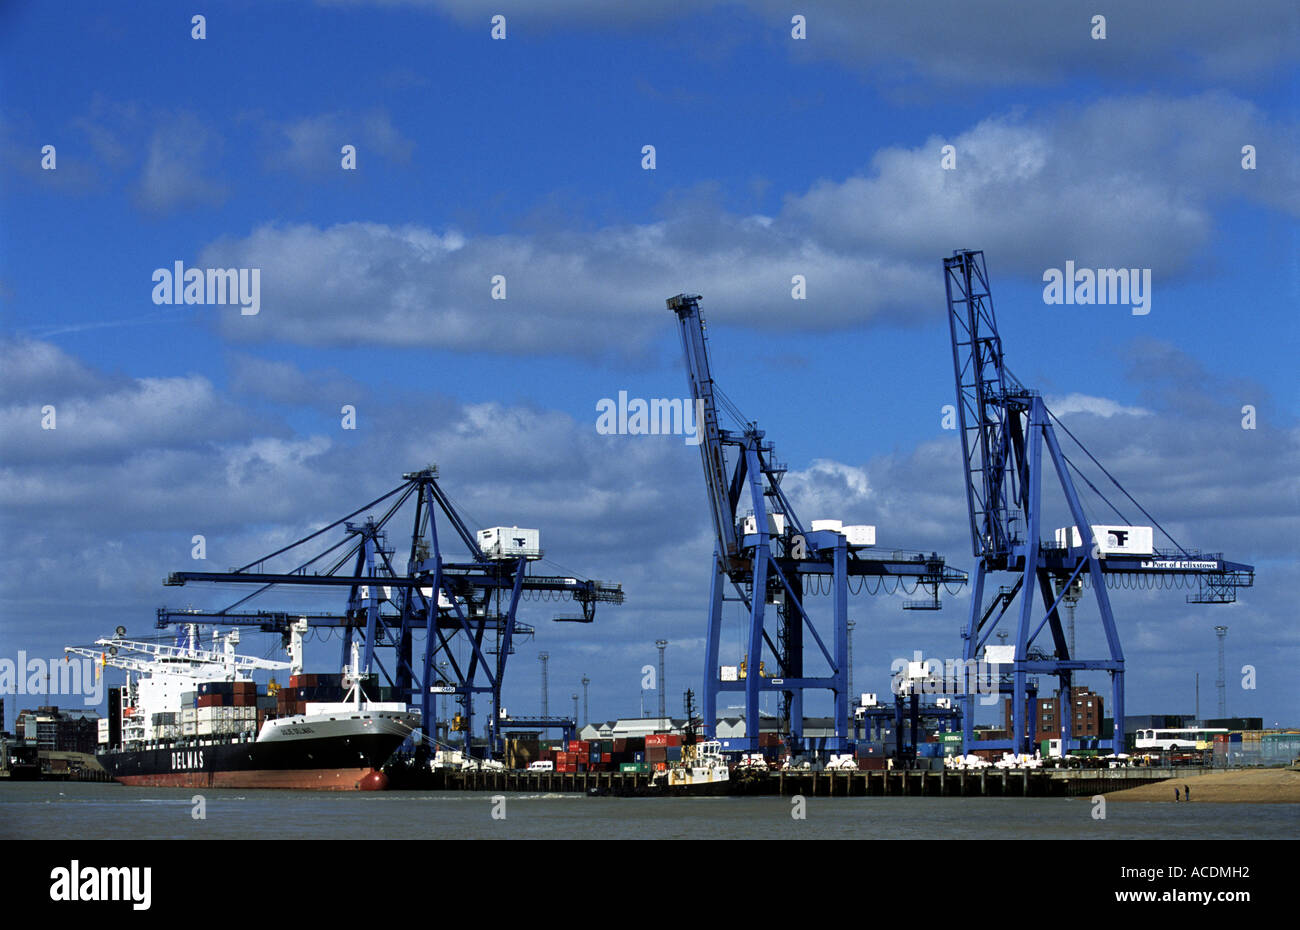 Landguard container terminal at the port of Felixstowe in Suffolk, UK. Stock Photo